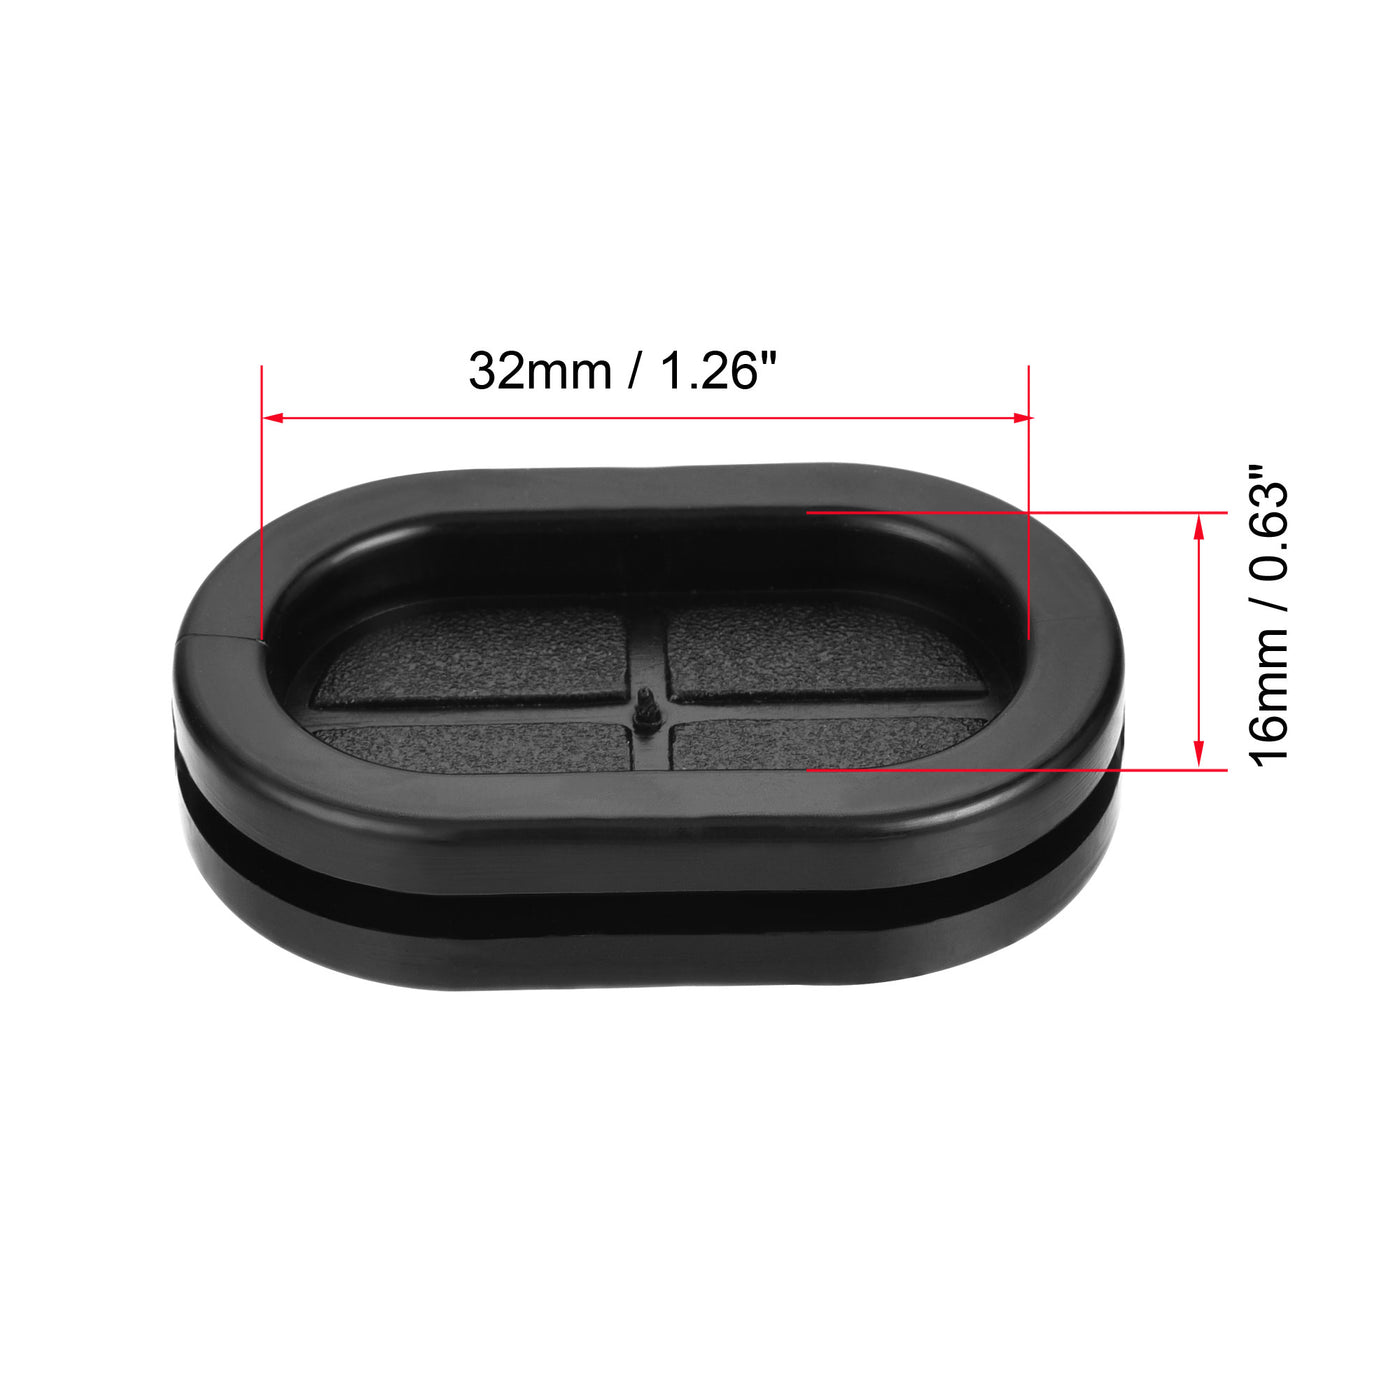 Uxcell Uxcell Rubber Grommet Oval Double-Sided Mount Size 35 x 20 mm for Wire Protection 4pcs